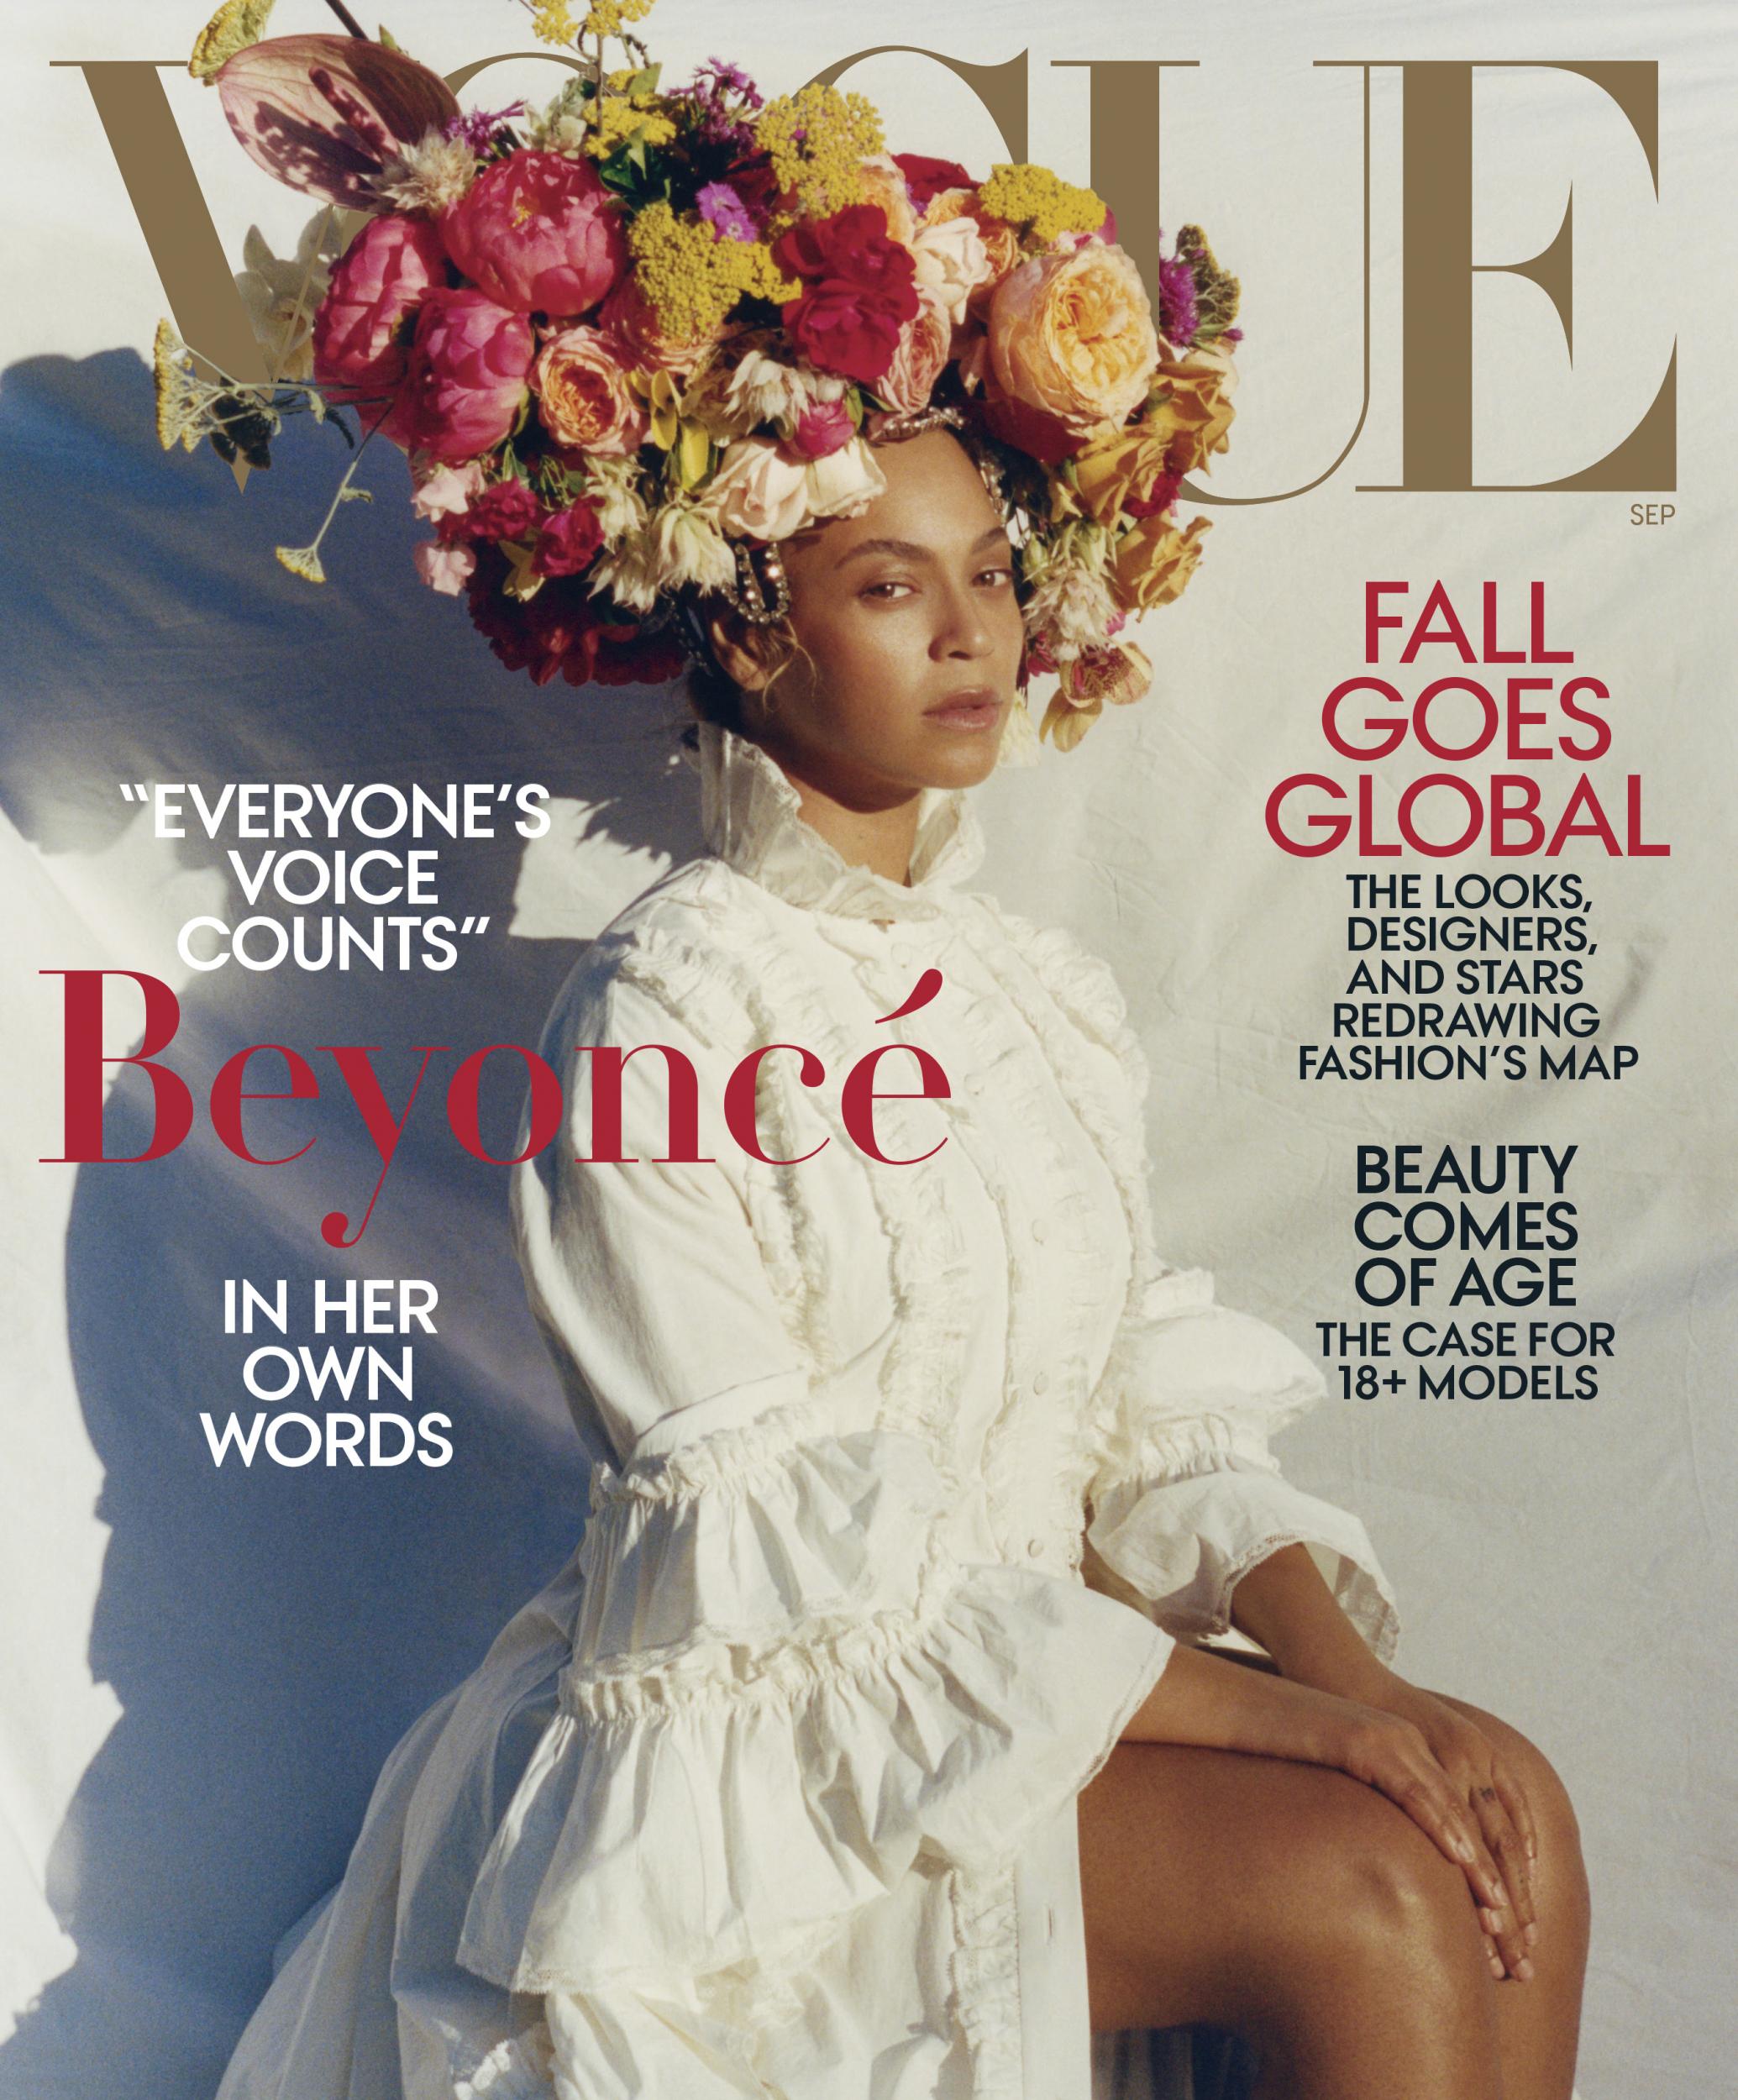 The singer wears a Gucci dress, Lynn Ban headpiece and Rebel Rebel floral headdress on the cover